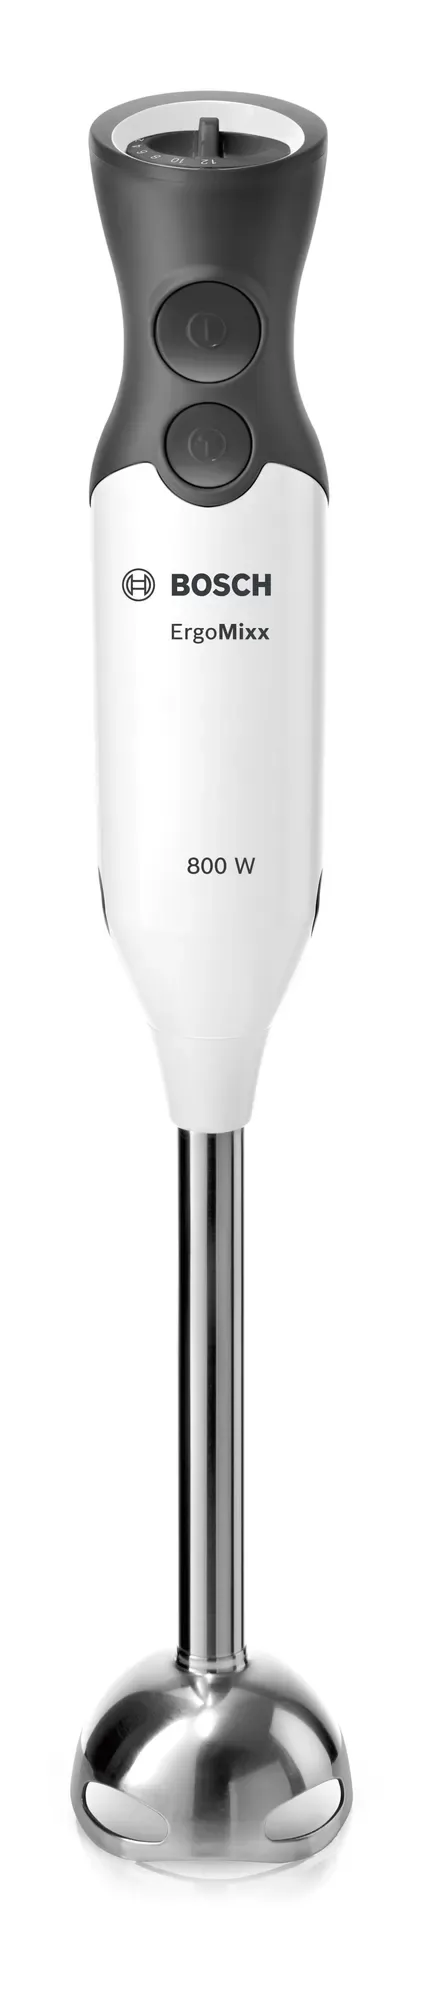 Пасатор, Bosch MS61A4110, Blender, ErgoMixx, 800 W, Included transparent jug, White, anthracite - image 5